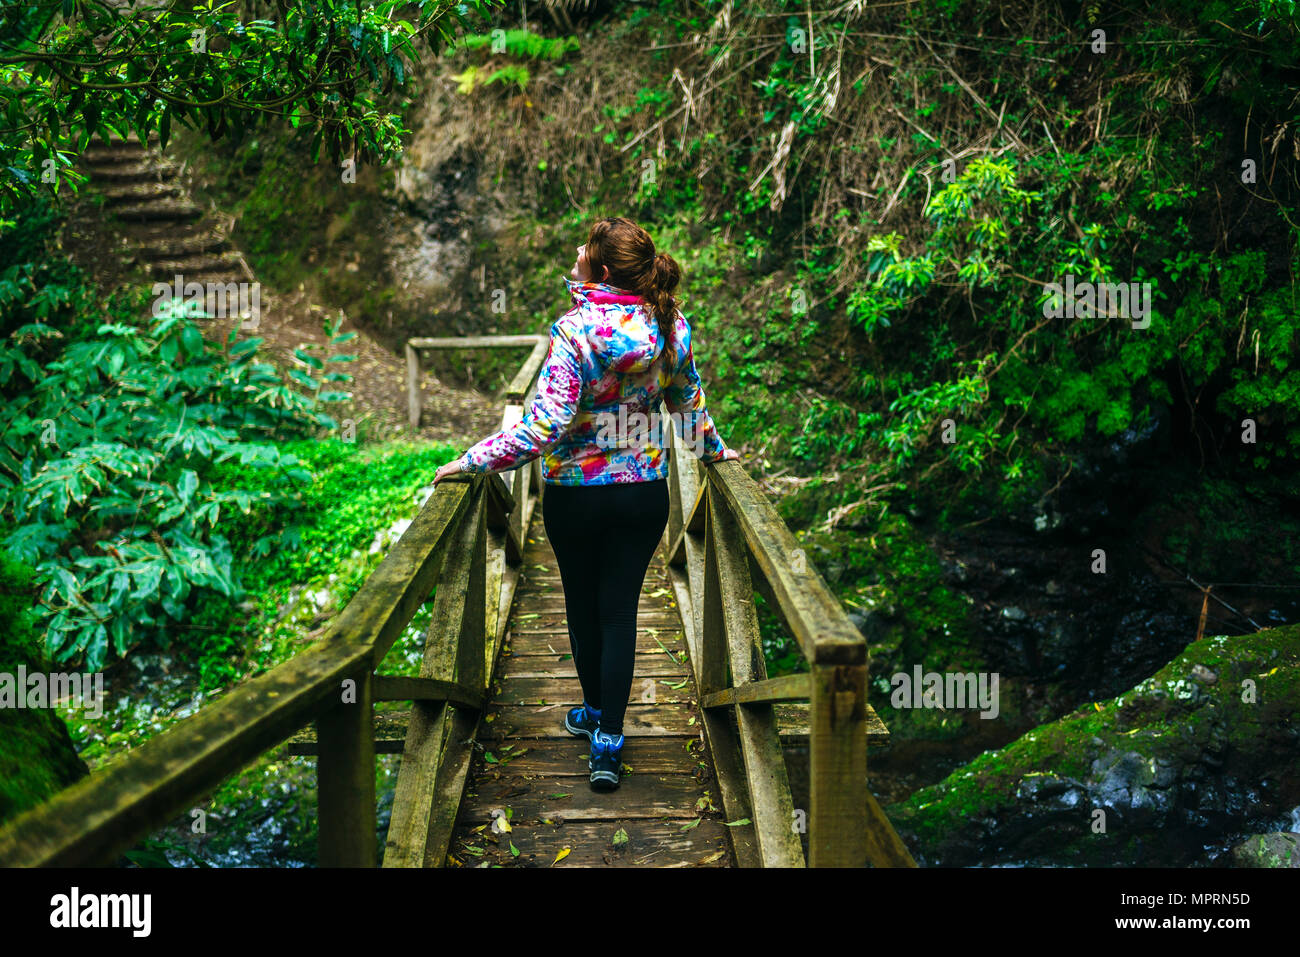 Azores, Sao Miguel, Woman walking on a wooden bridge through the forest Stock Photo